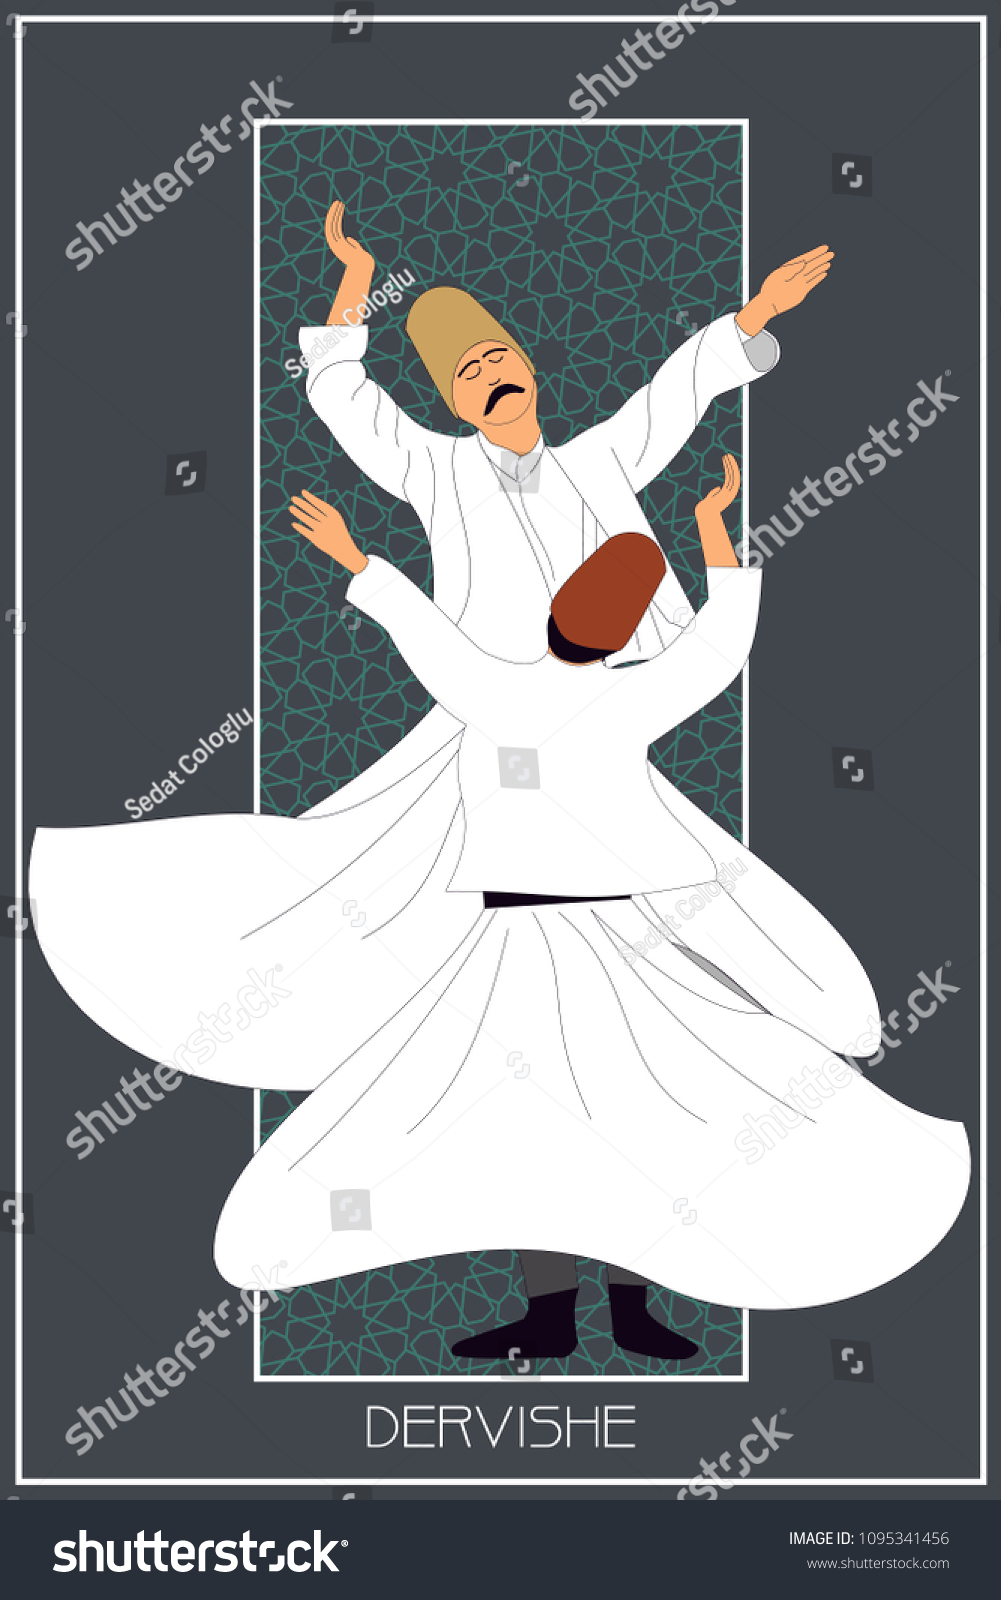 stock-vector-dervish-symbolic-study-of-mevlevi-mystical-dance-this-painting-represents-a-movement-of-this-1095341456